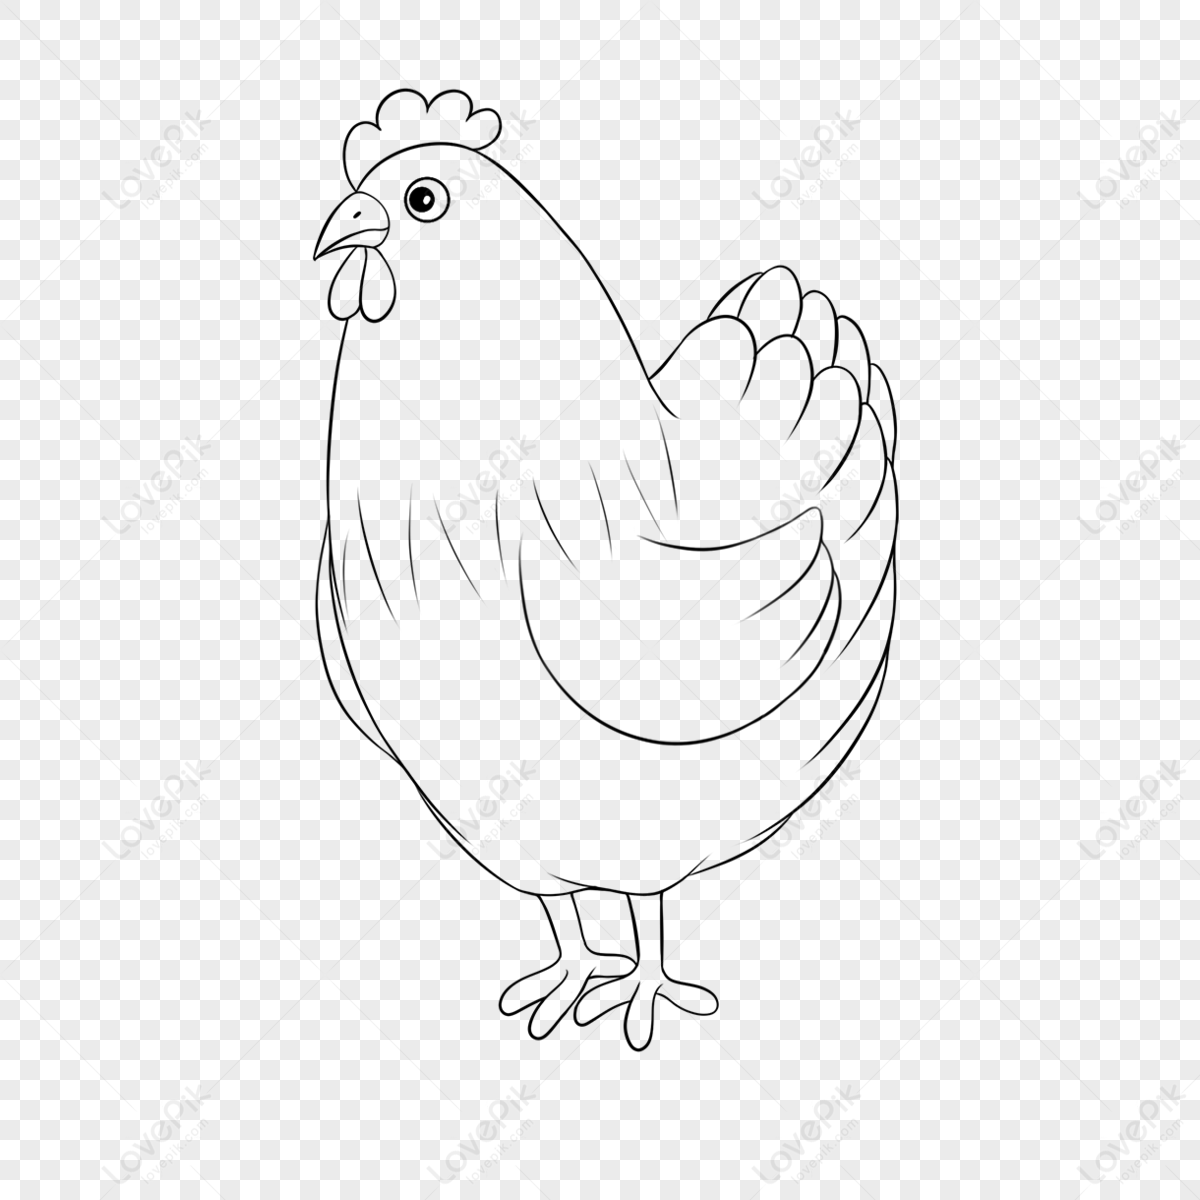 How to draw a cartoon hen | Step by step Drawing tutorials